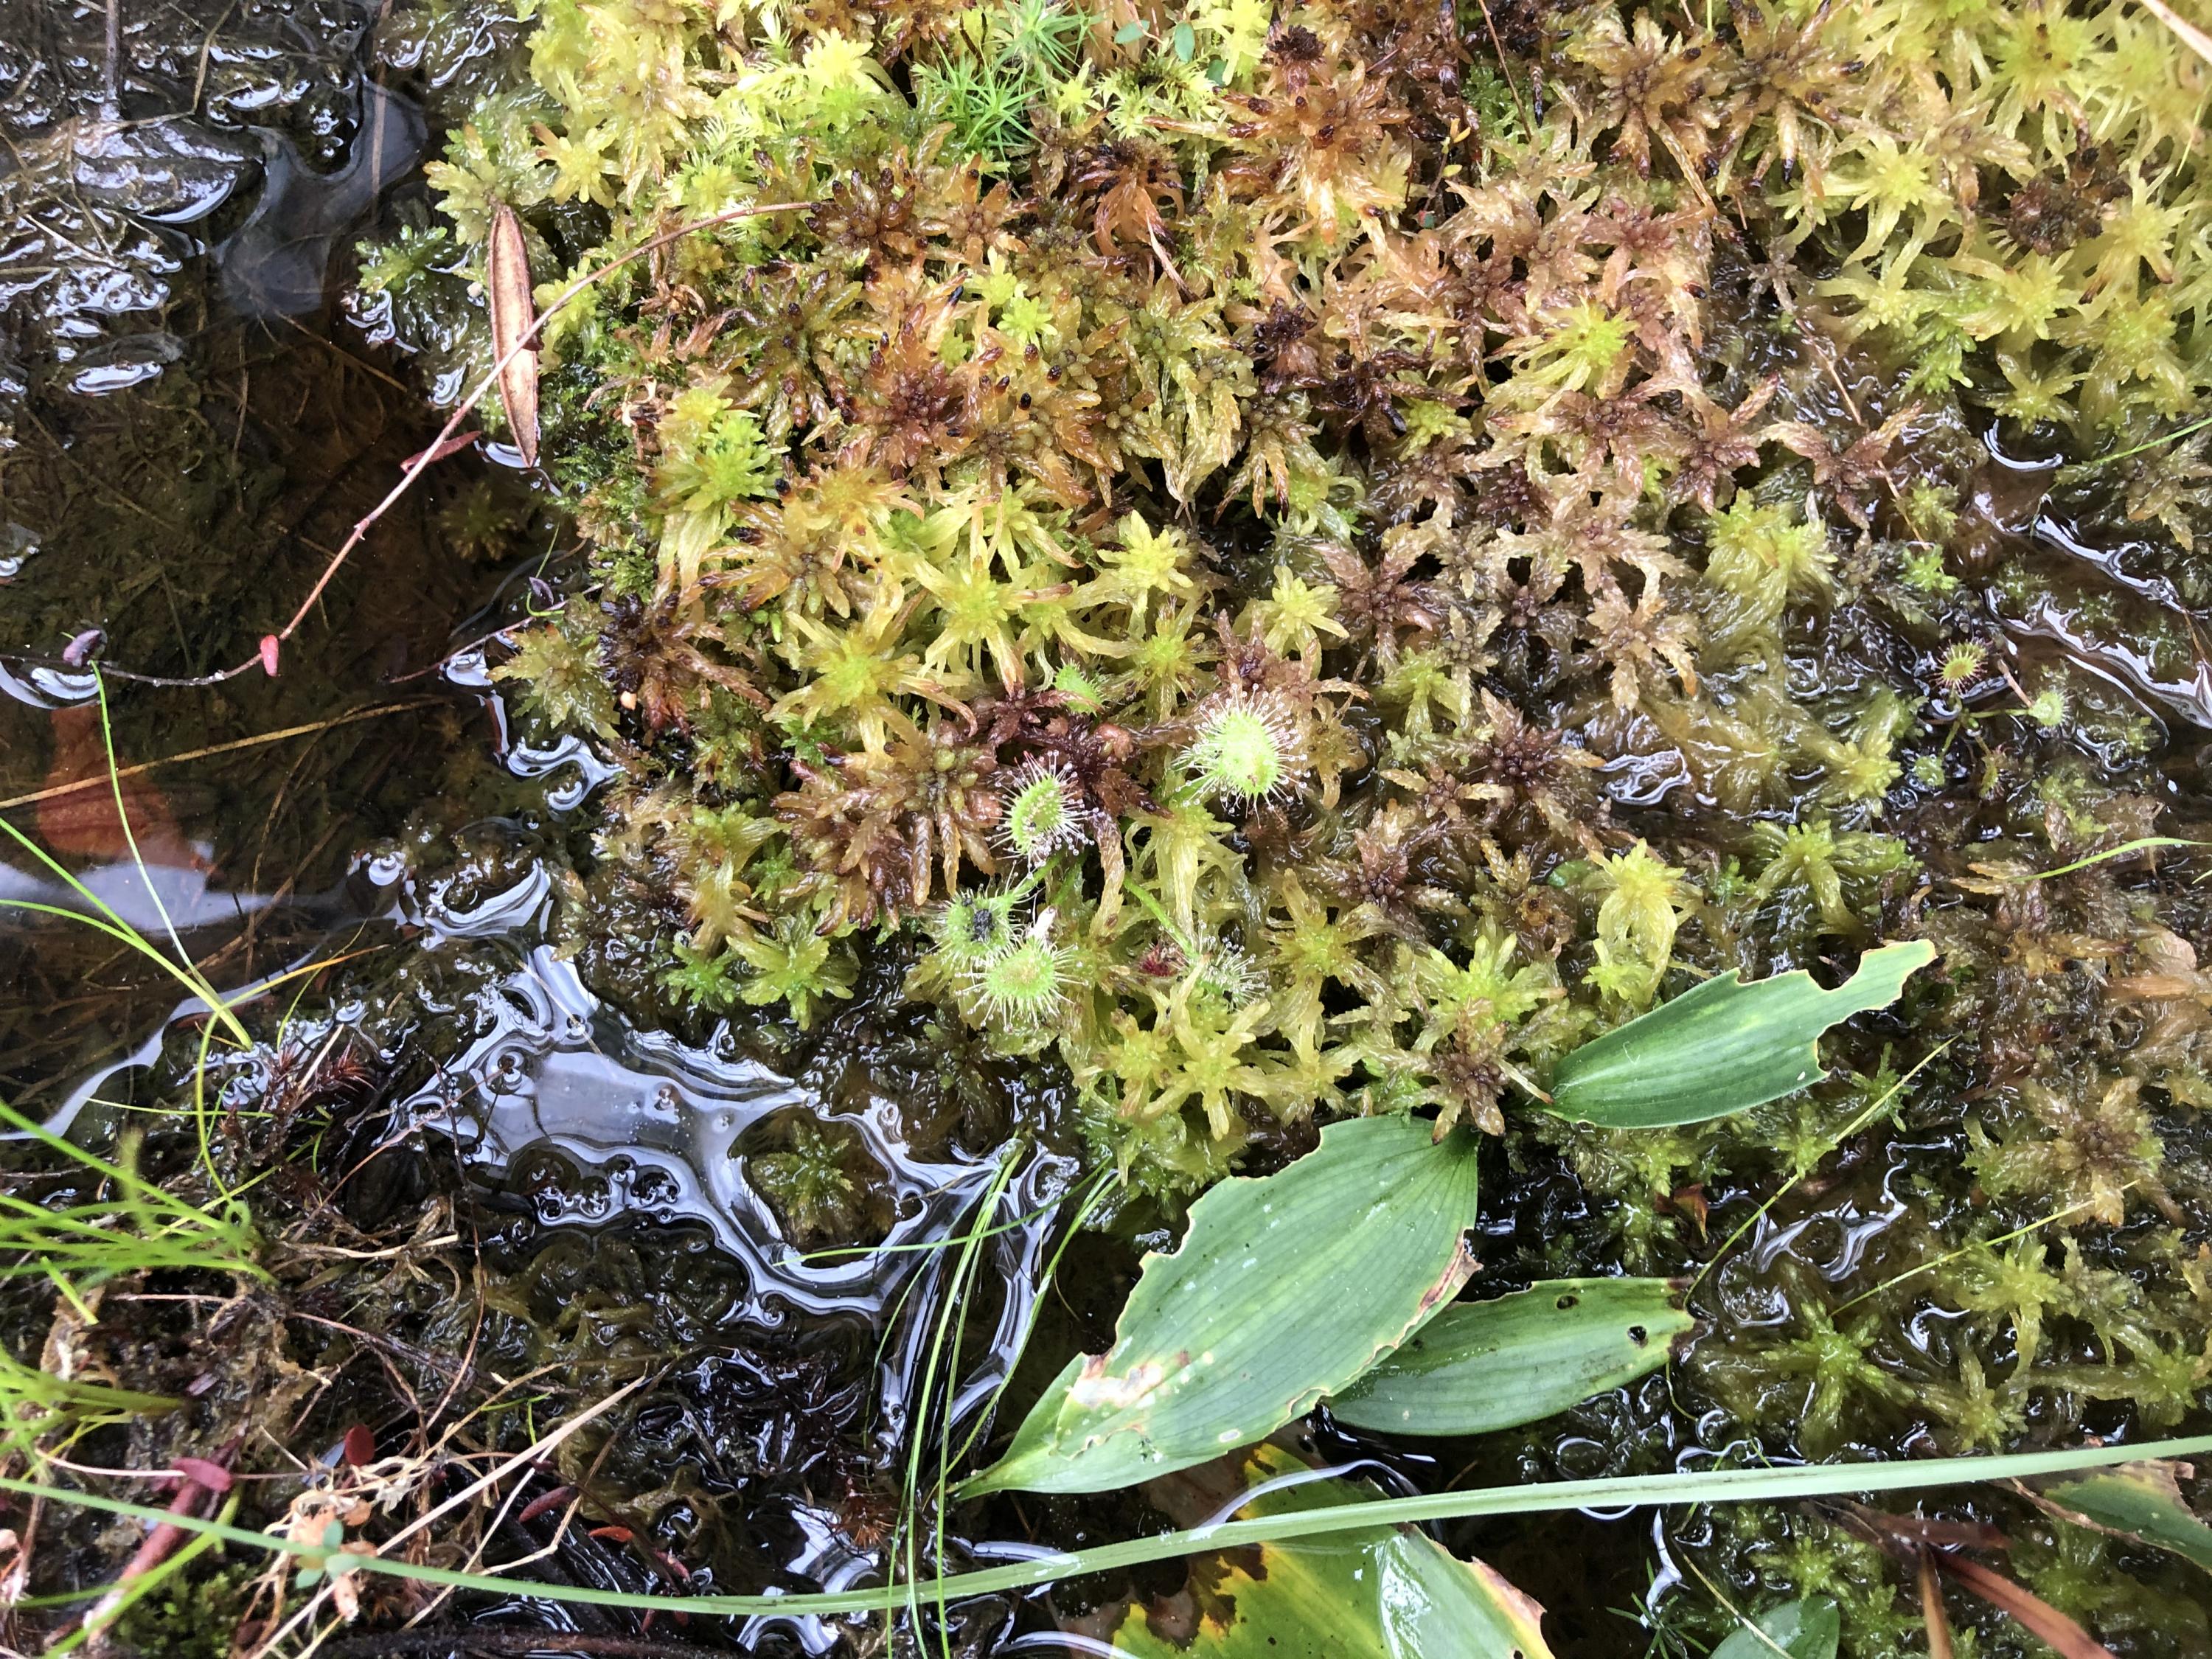 Plants in the SPRUCE experimental area are dominated by peat mosses of the genus Sphagnum, which is an ecosystem engineer that produces much of the degrading biomass or “peat” in soils of northern peatlands. (Photo Joel Kostka)